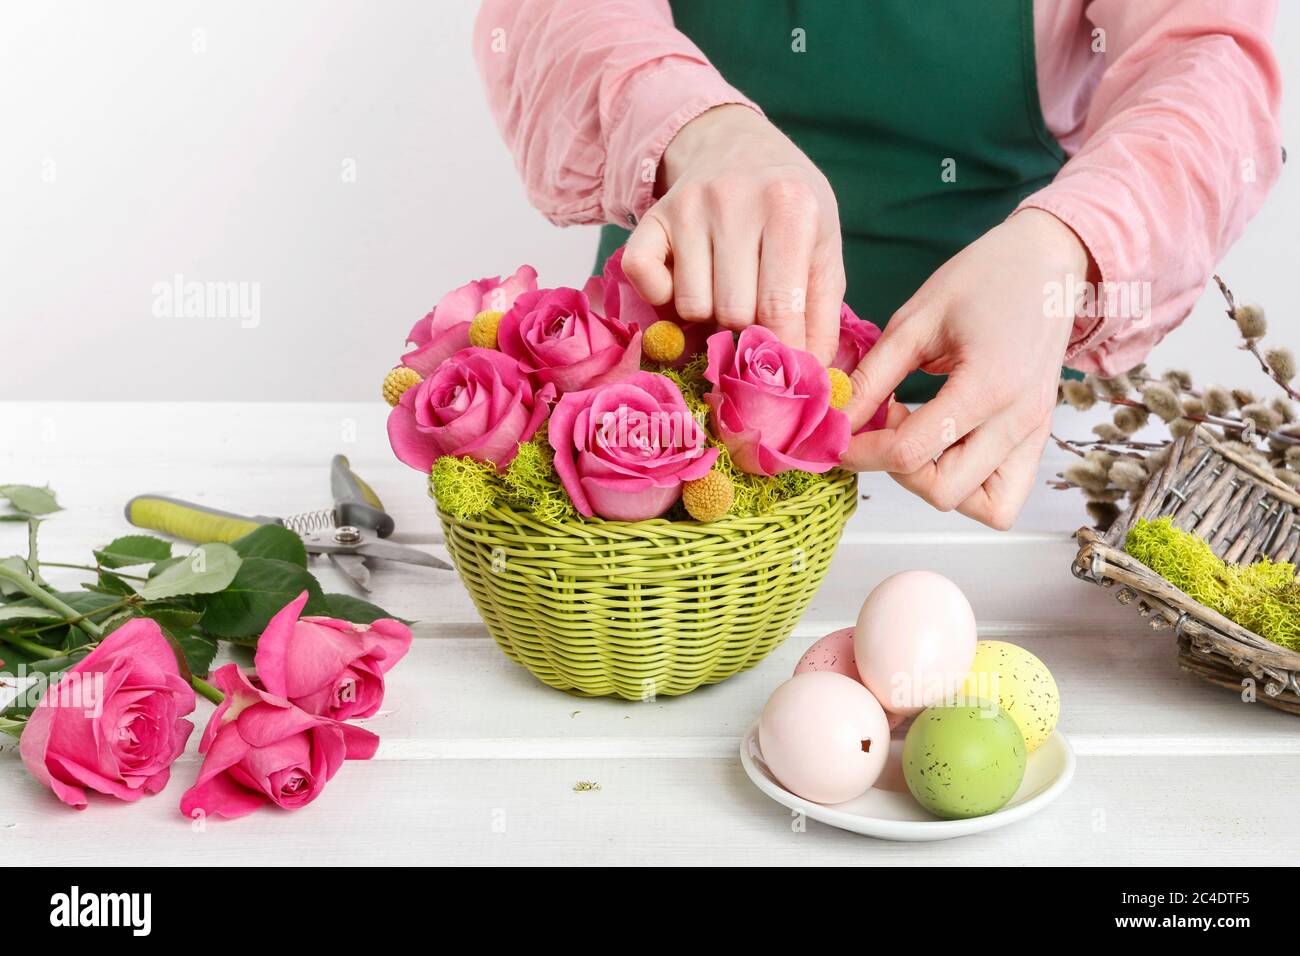 Florist at work: woman shows how to make Easter table decoration with roses, moss and catkins. Step by step, tutorial. Stock Photo